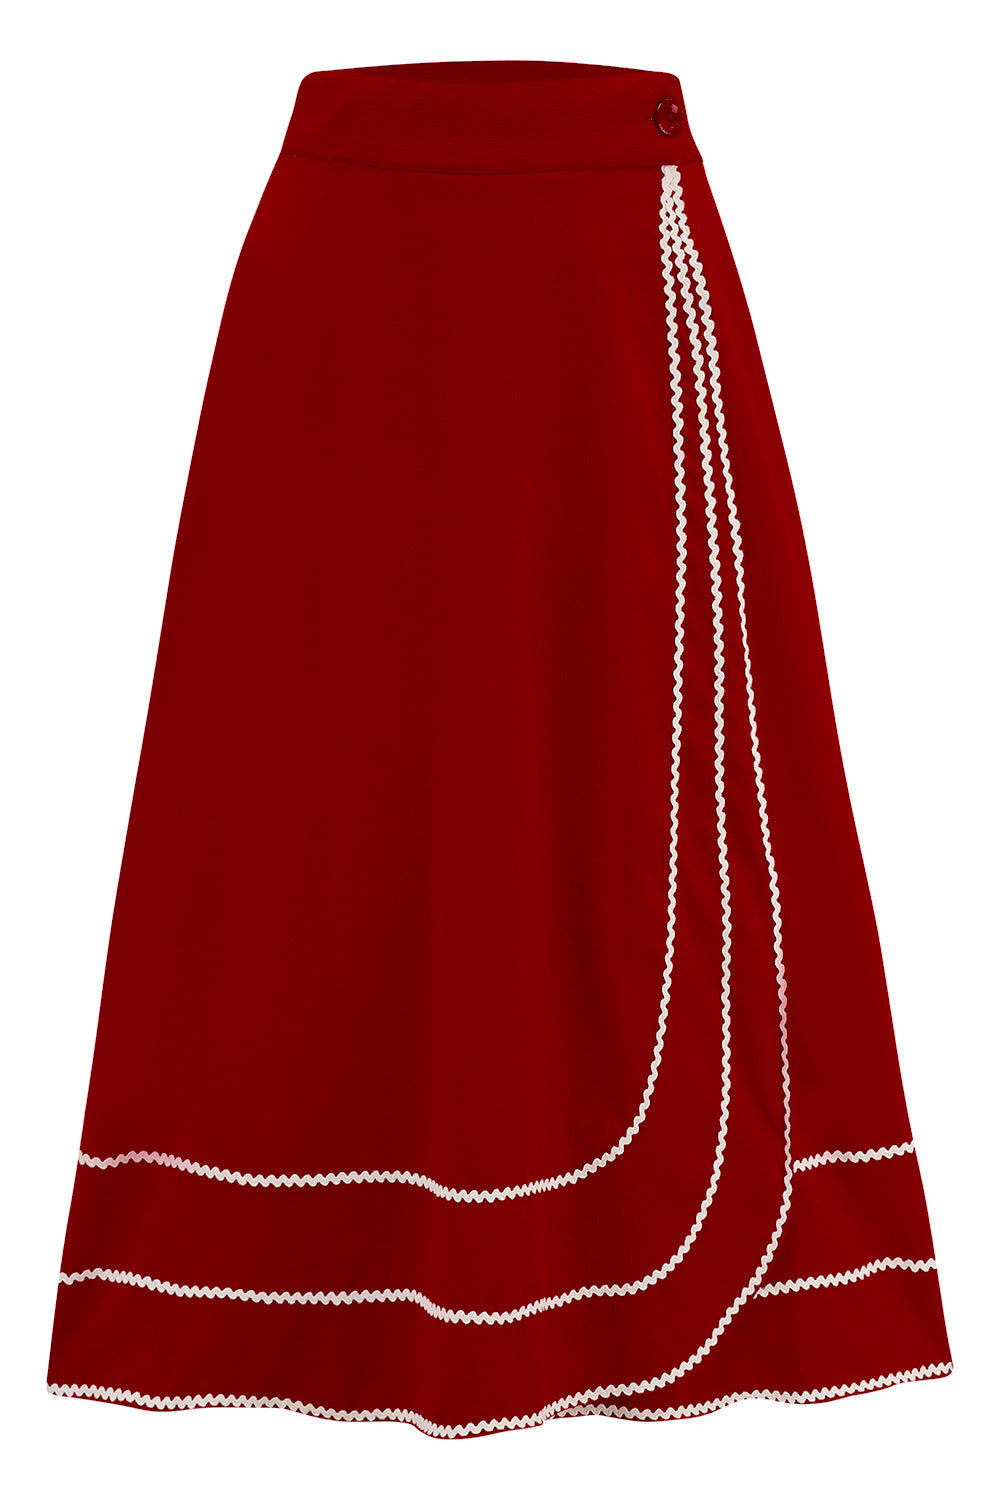 The "Glynis" Wrap Around Circle Skirt with Pockets in Wine with Ivory Ric Rac, True & Authentic 1950s Vintage Style